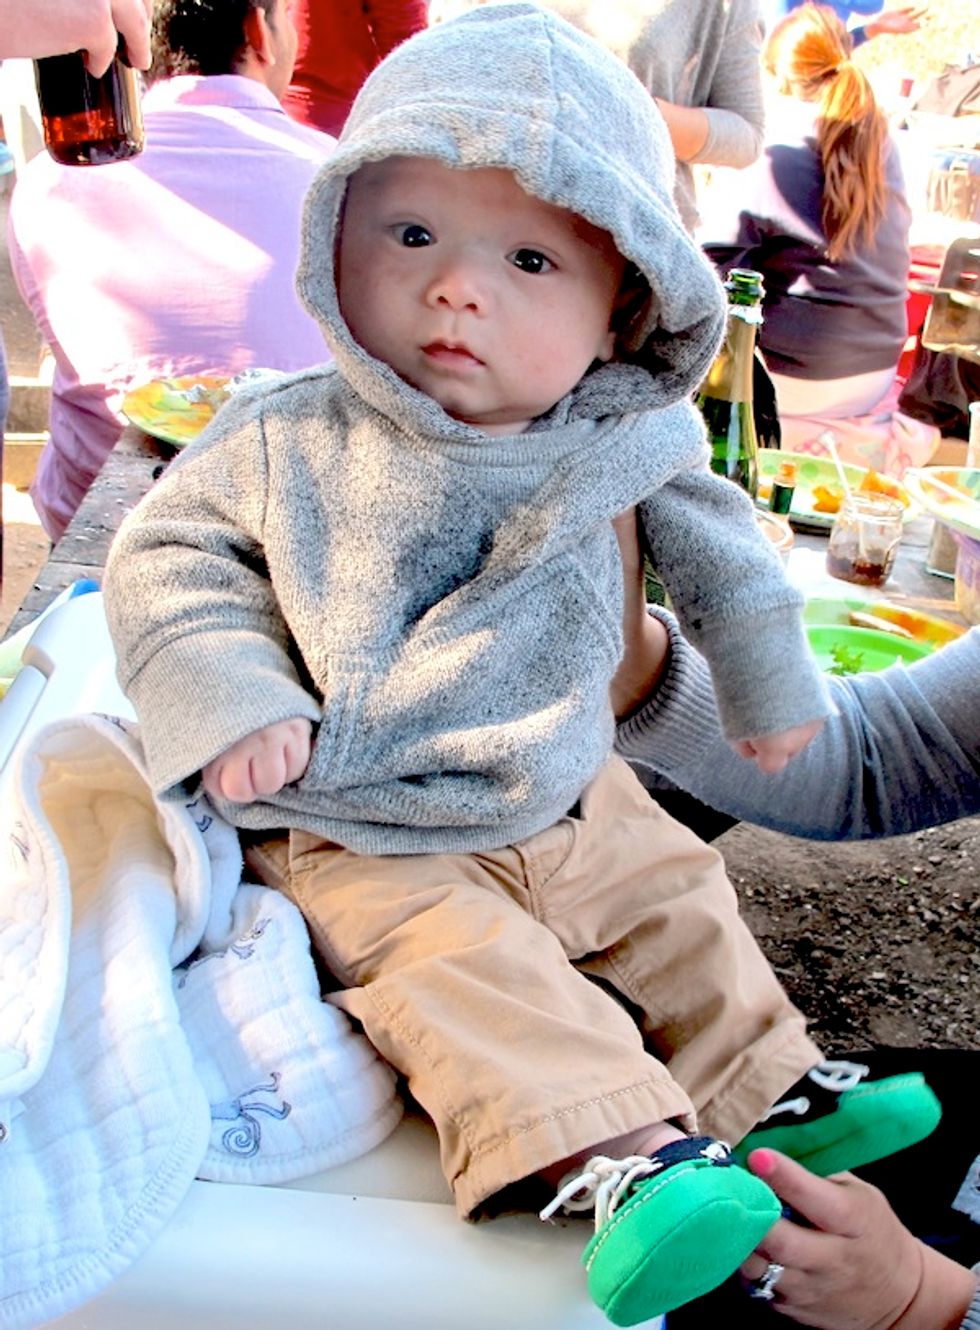 Street Style Report: An Adorable Baby Shows Us How to Dress for Tomales Bay